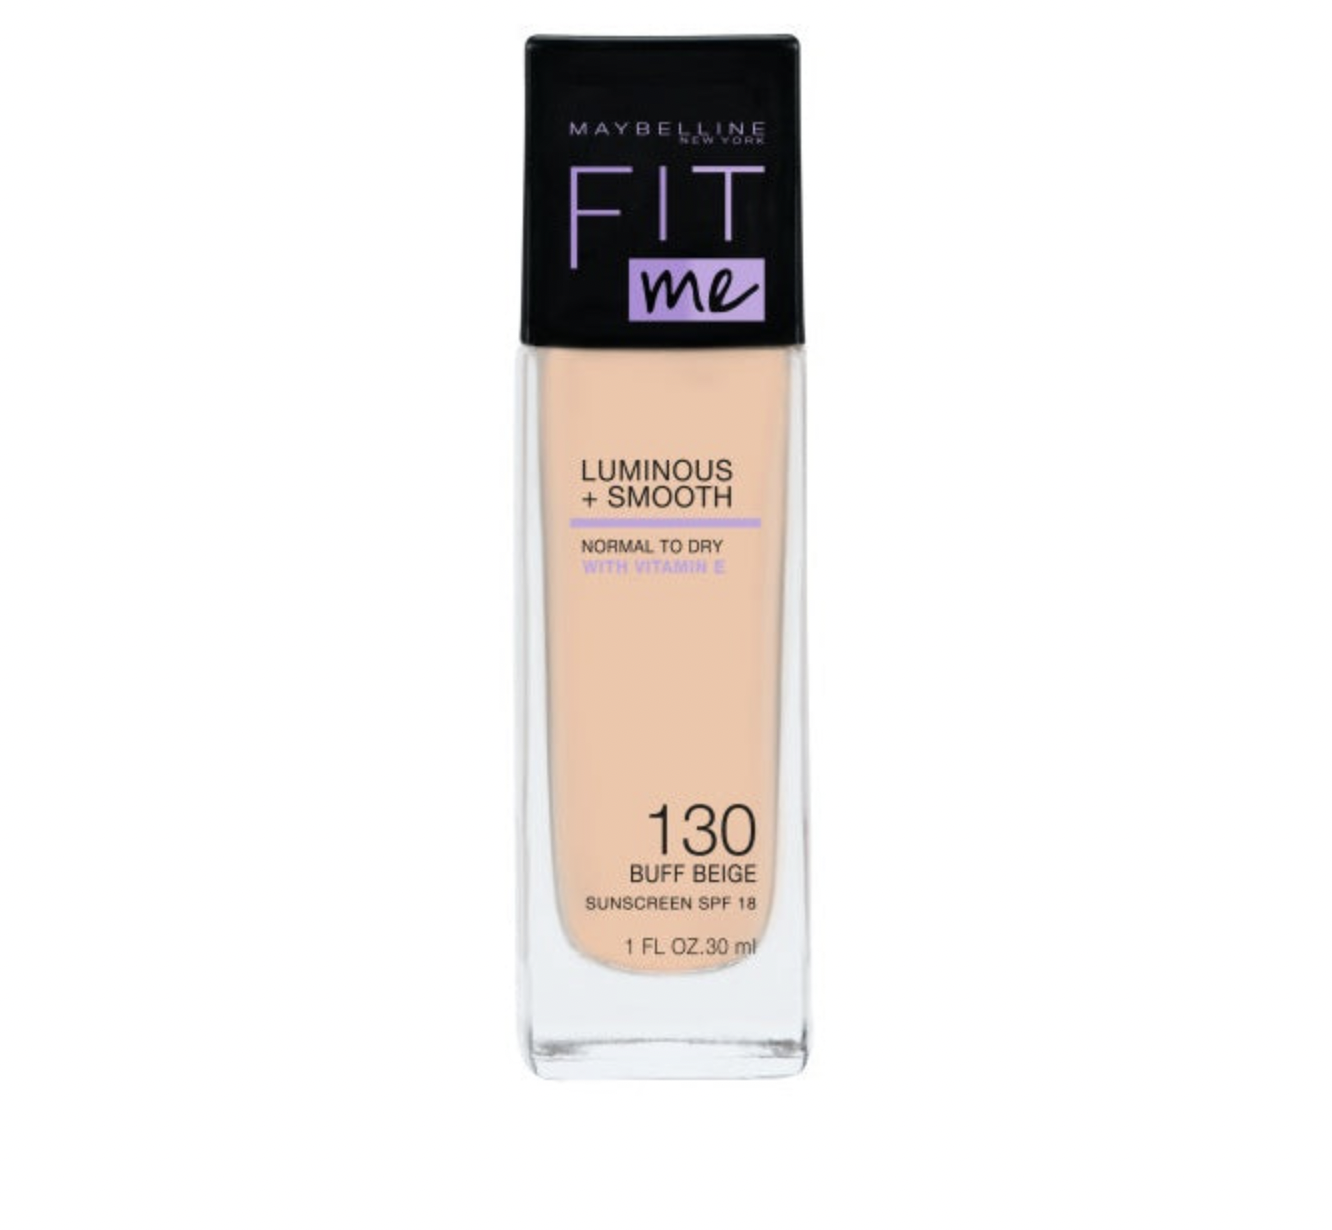   / Maybelline -   Fitme Luminous+Smooth  130 Buff Beige 30 